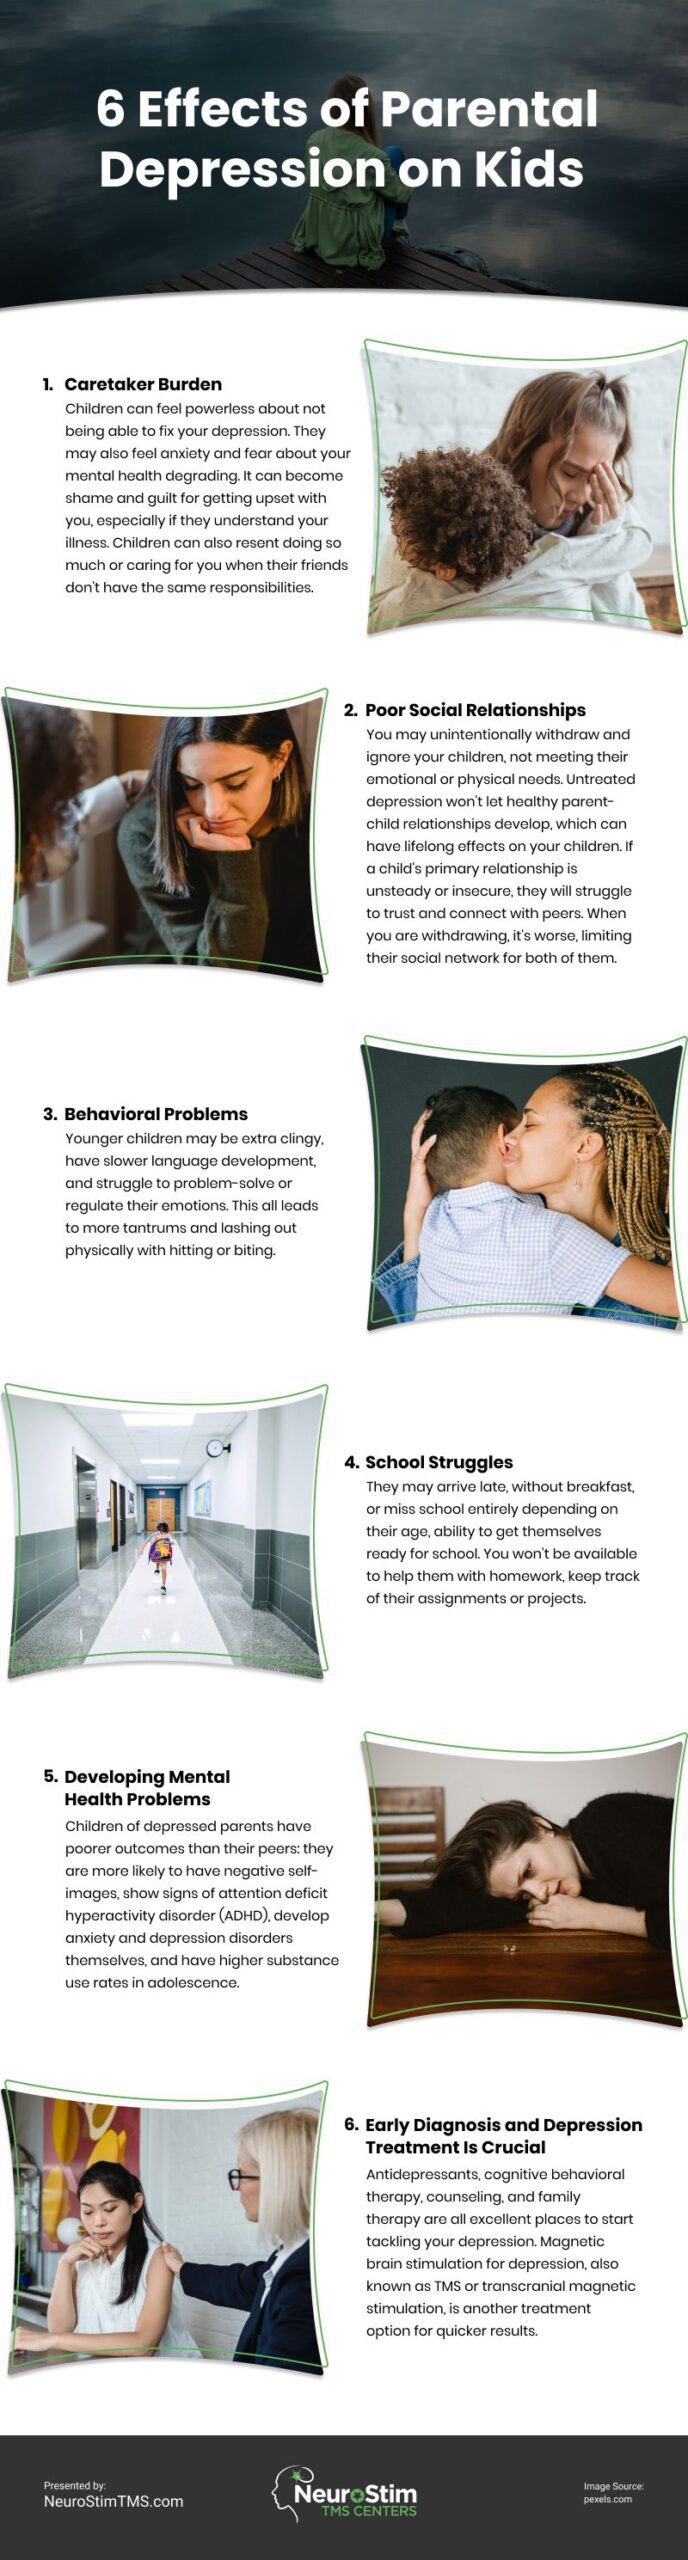 6 Effects of Parental Depression on Kids Infographic